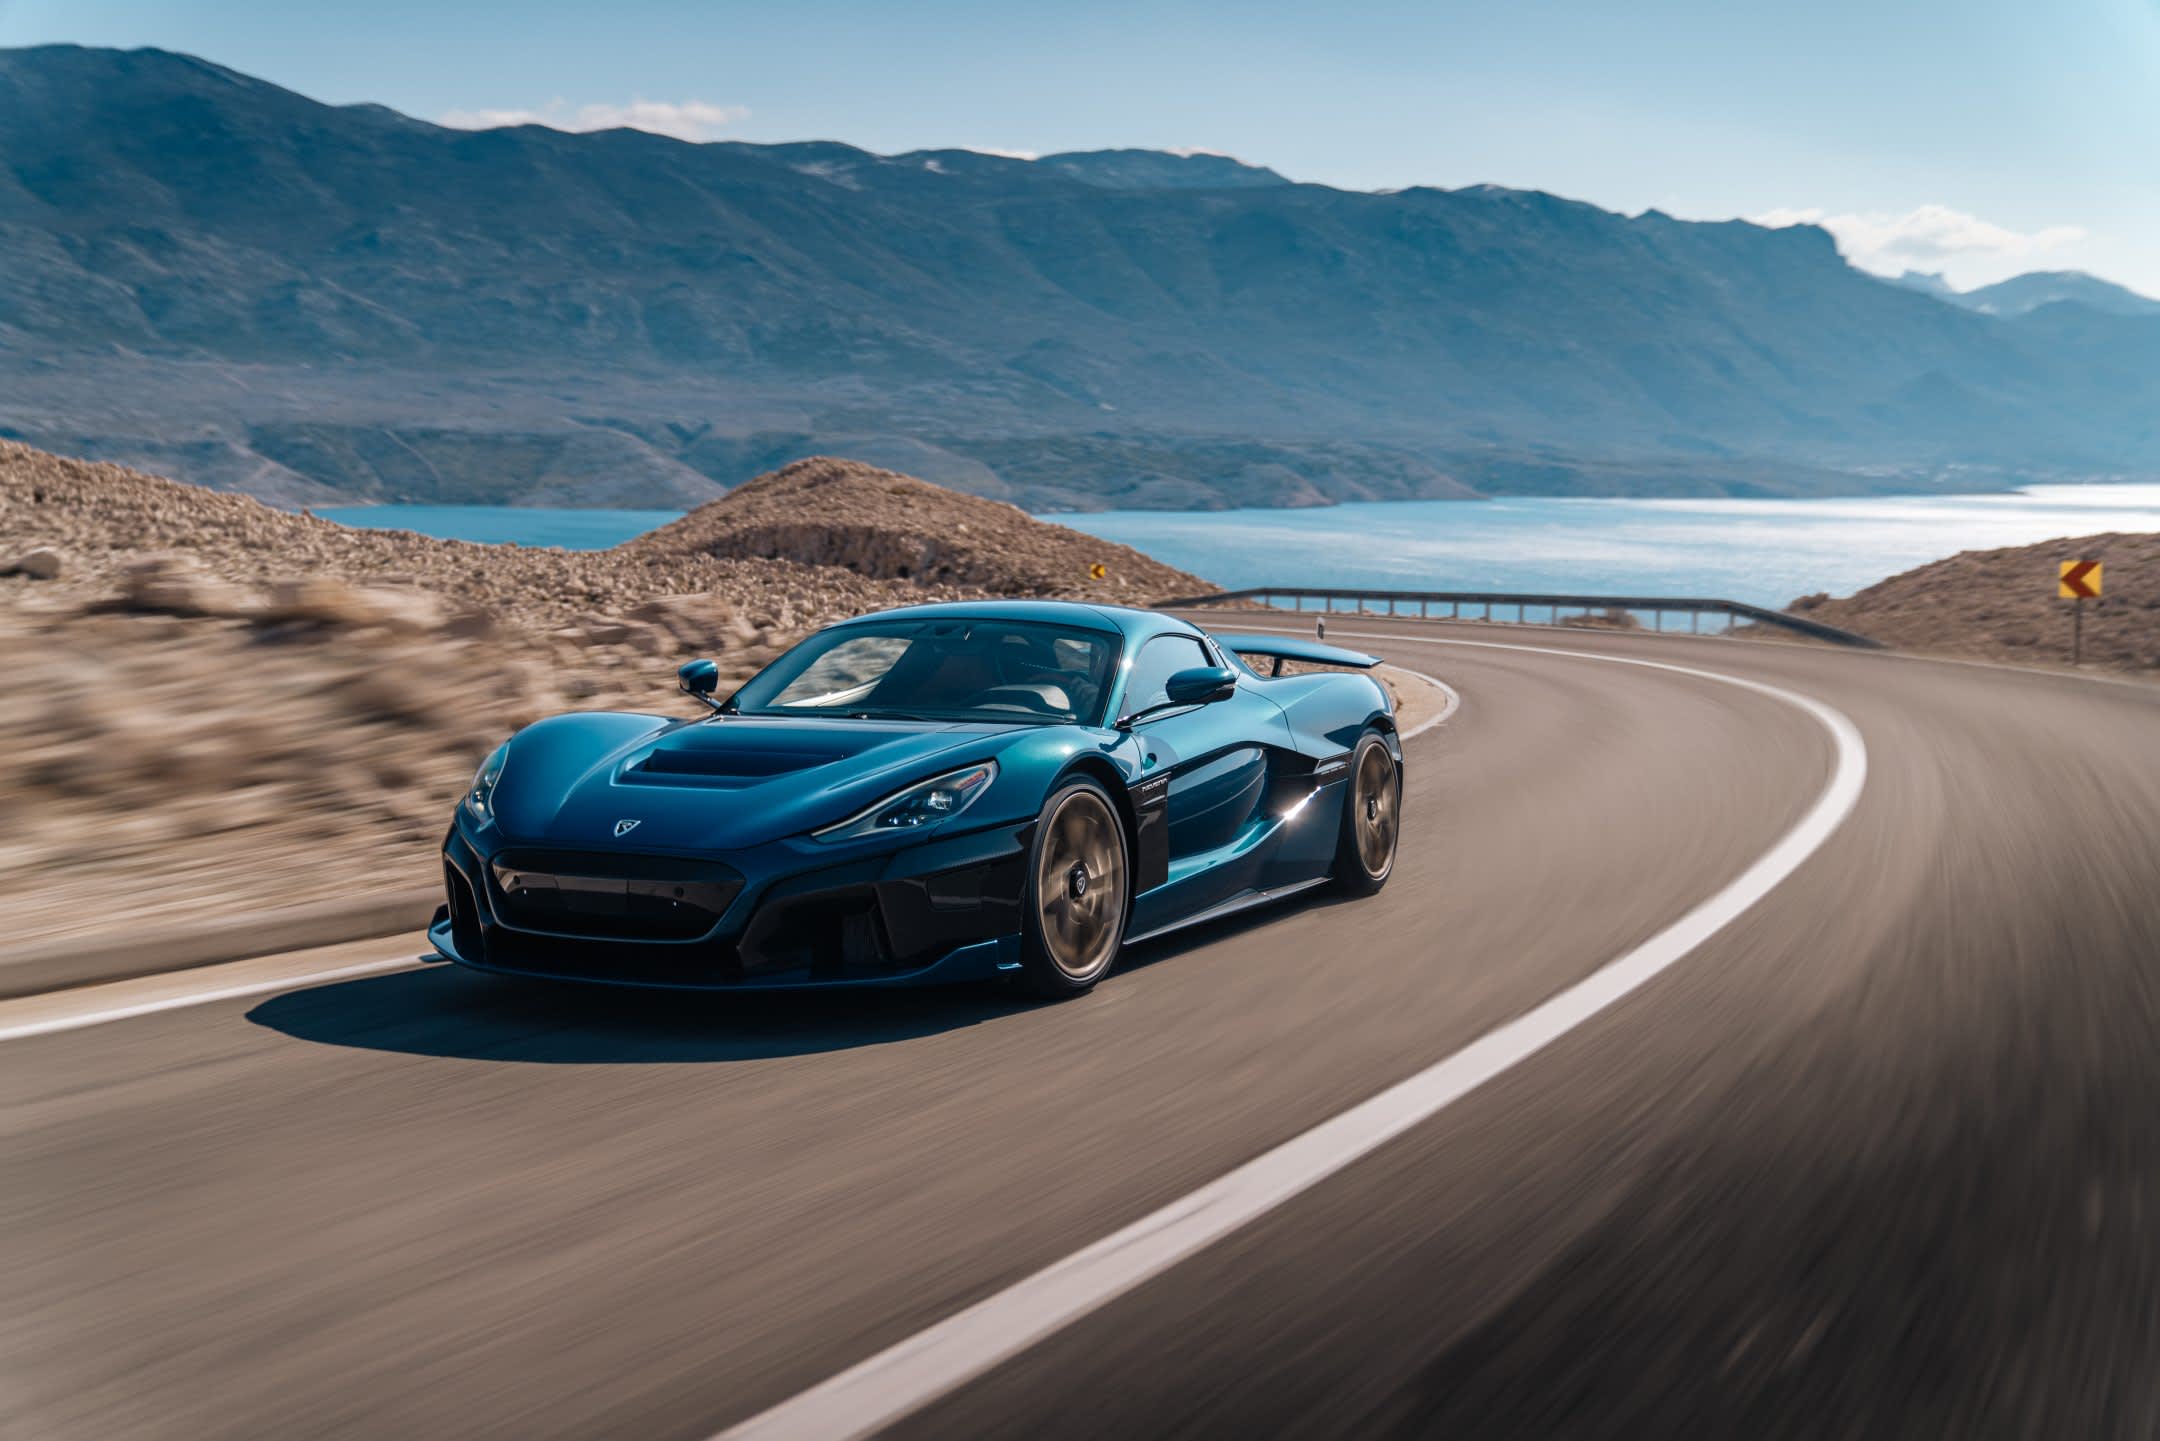 Rimac Nevera EV review: Powerful and easy to drive